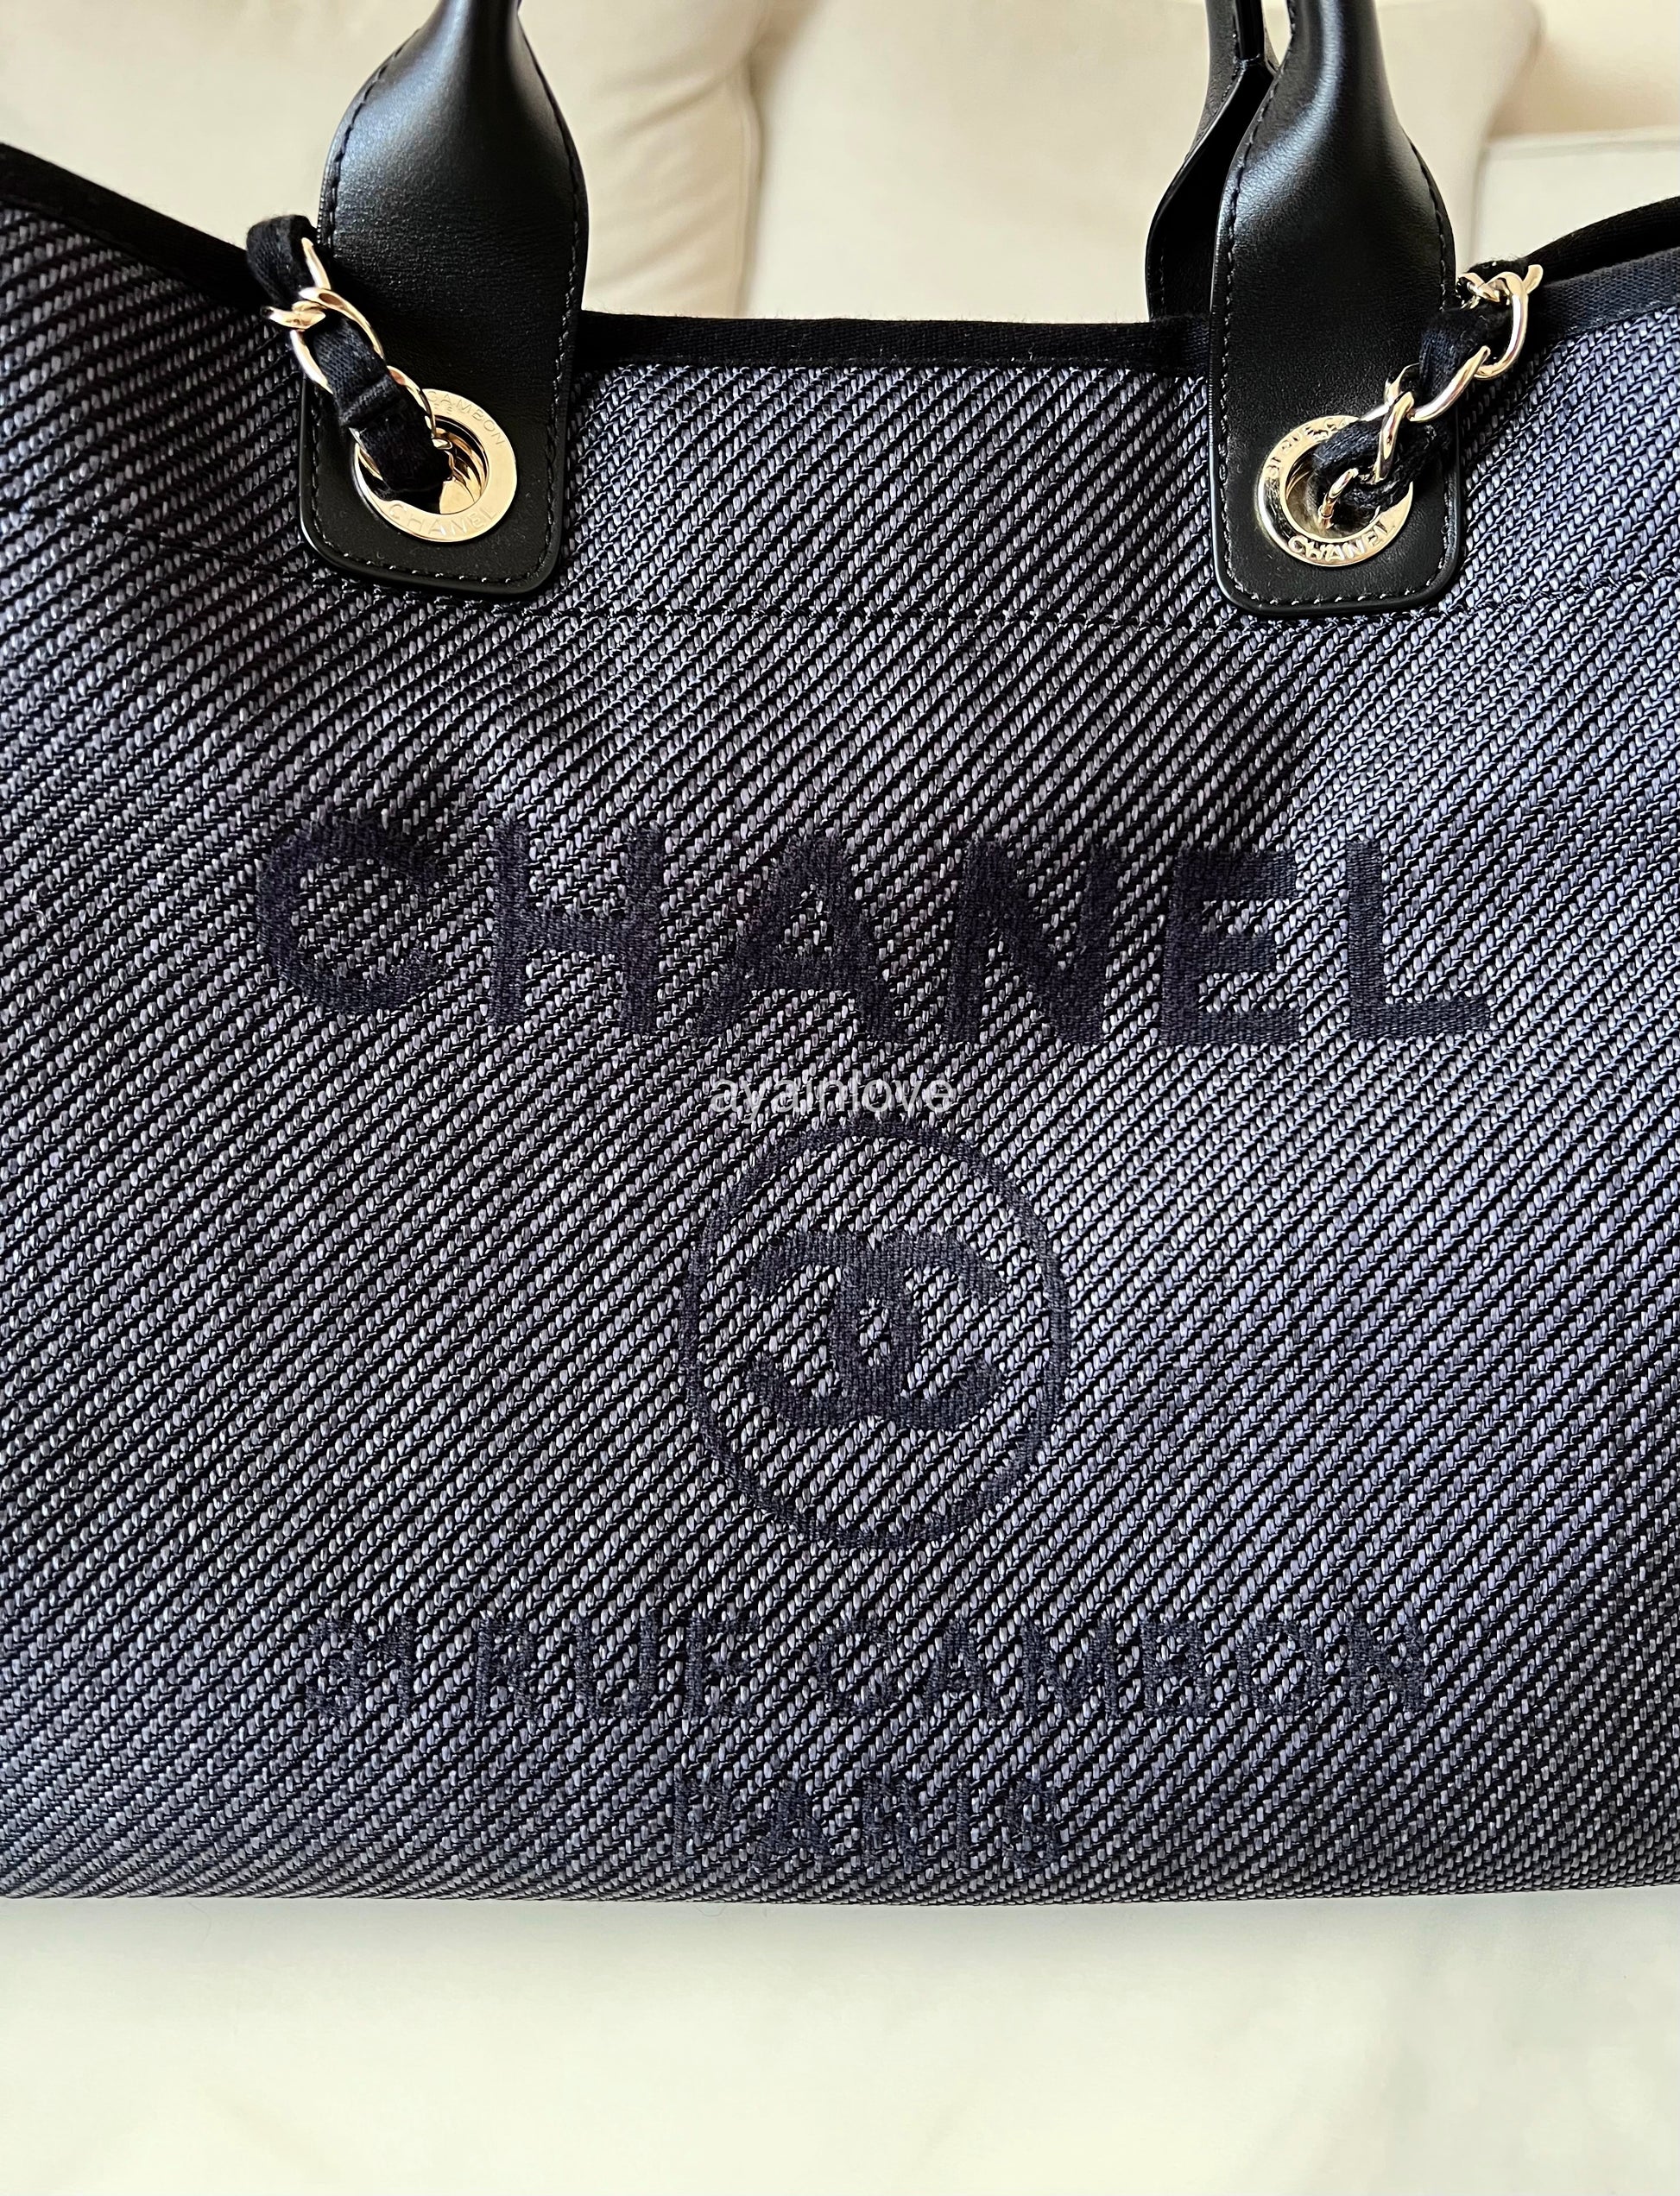 CHANEL Navy Blue Canvas Deauville Medium Tote Bag 2020 Light Gold Hard –  AYAINLOVE CURATED LUXURIES